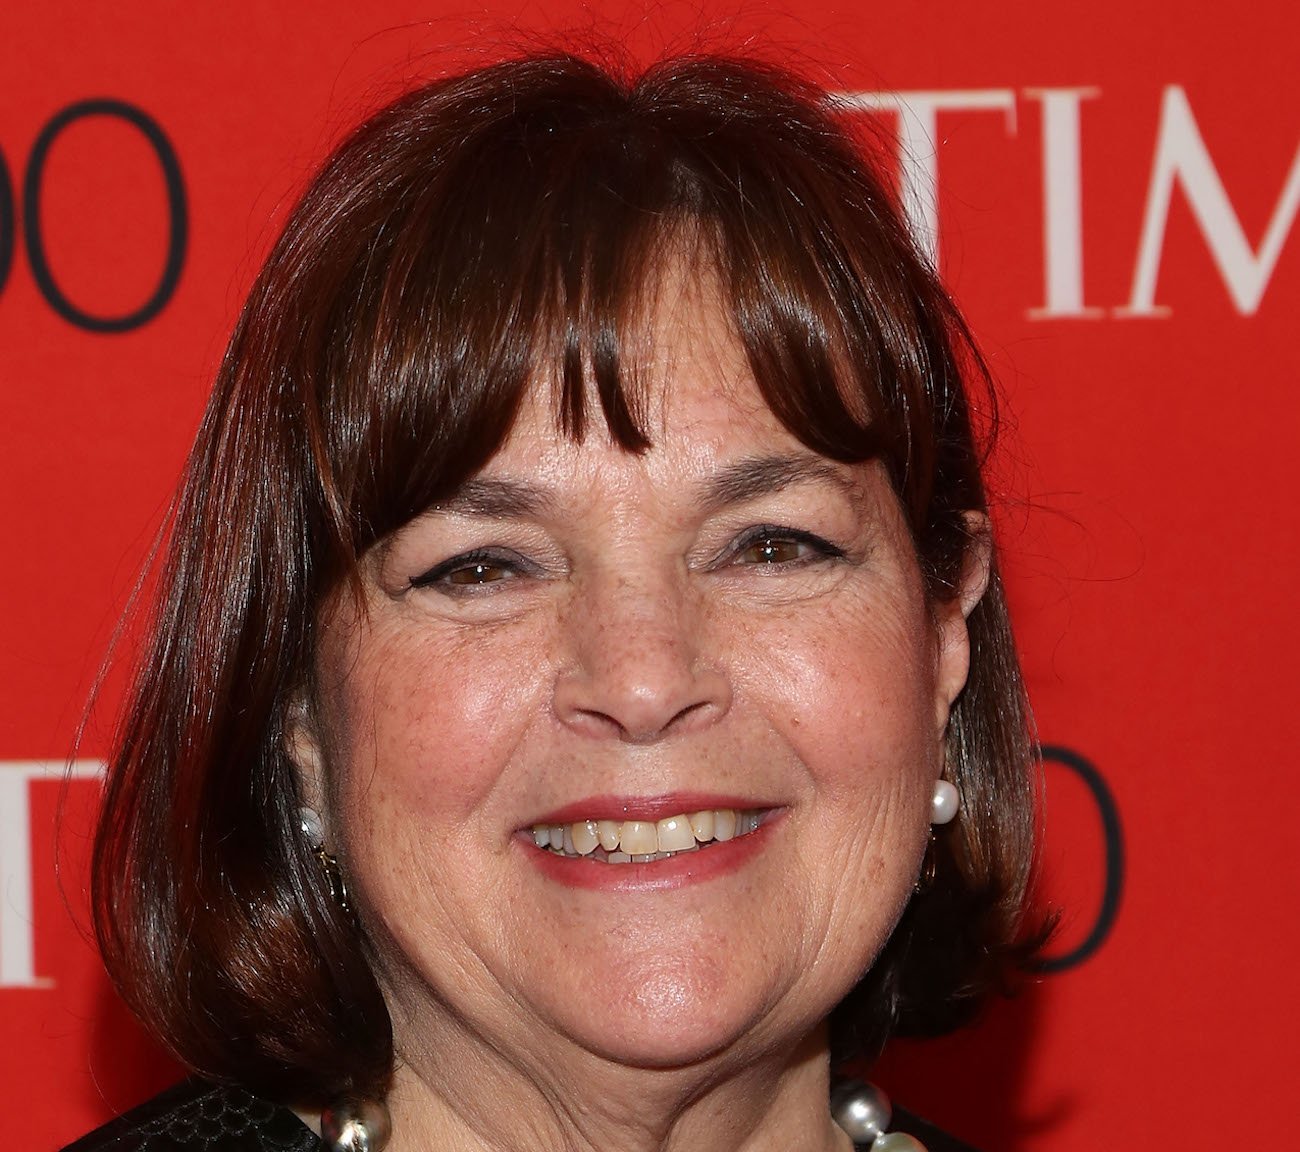 Ina Garten smiles as she poses for cameras at the 2015 Time 100 Gala